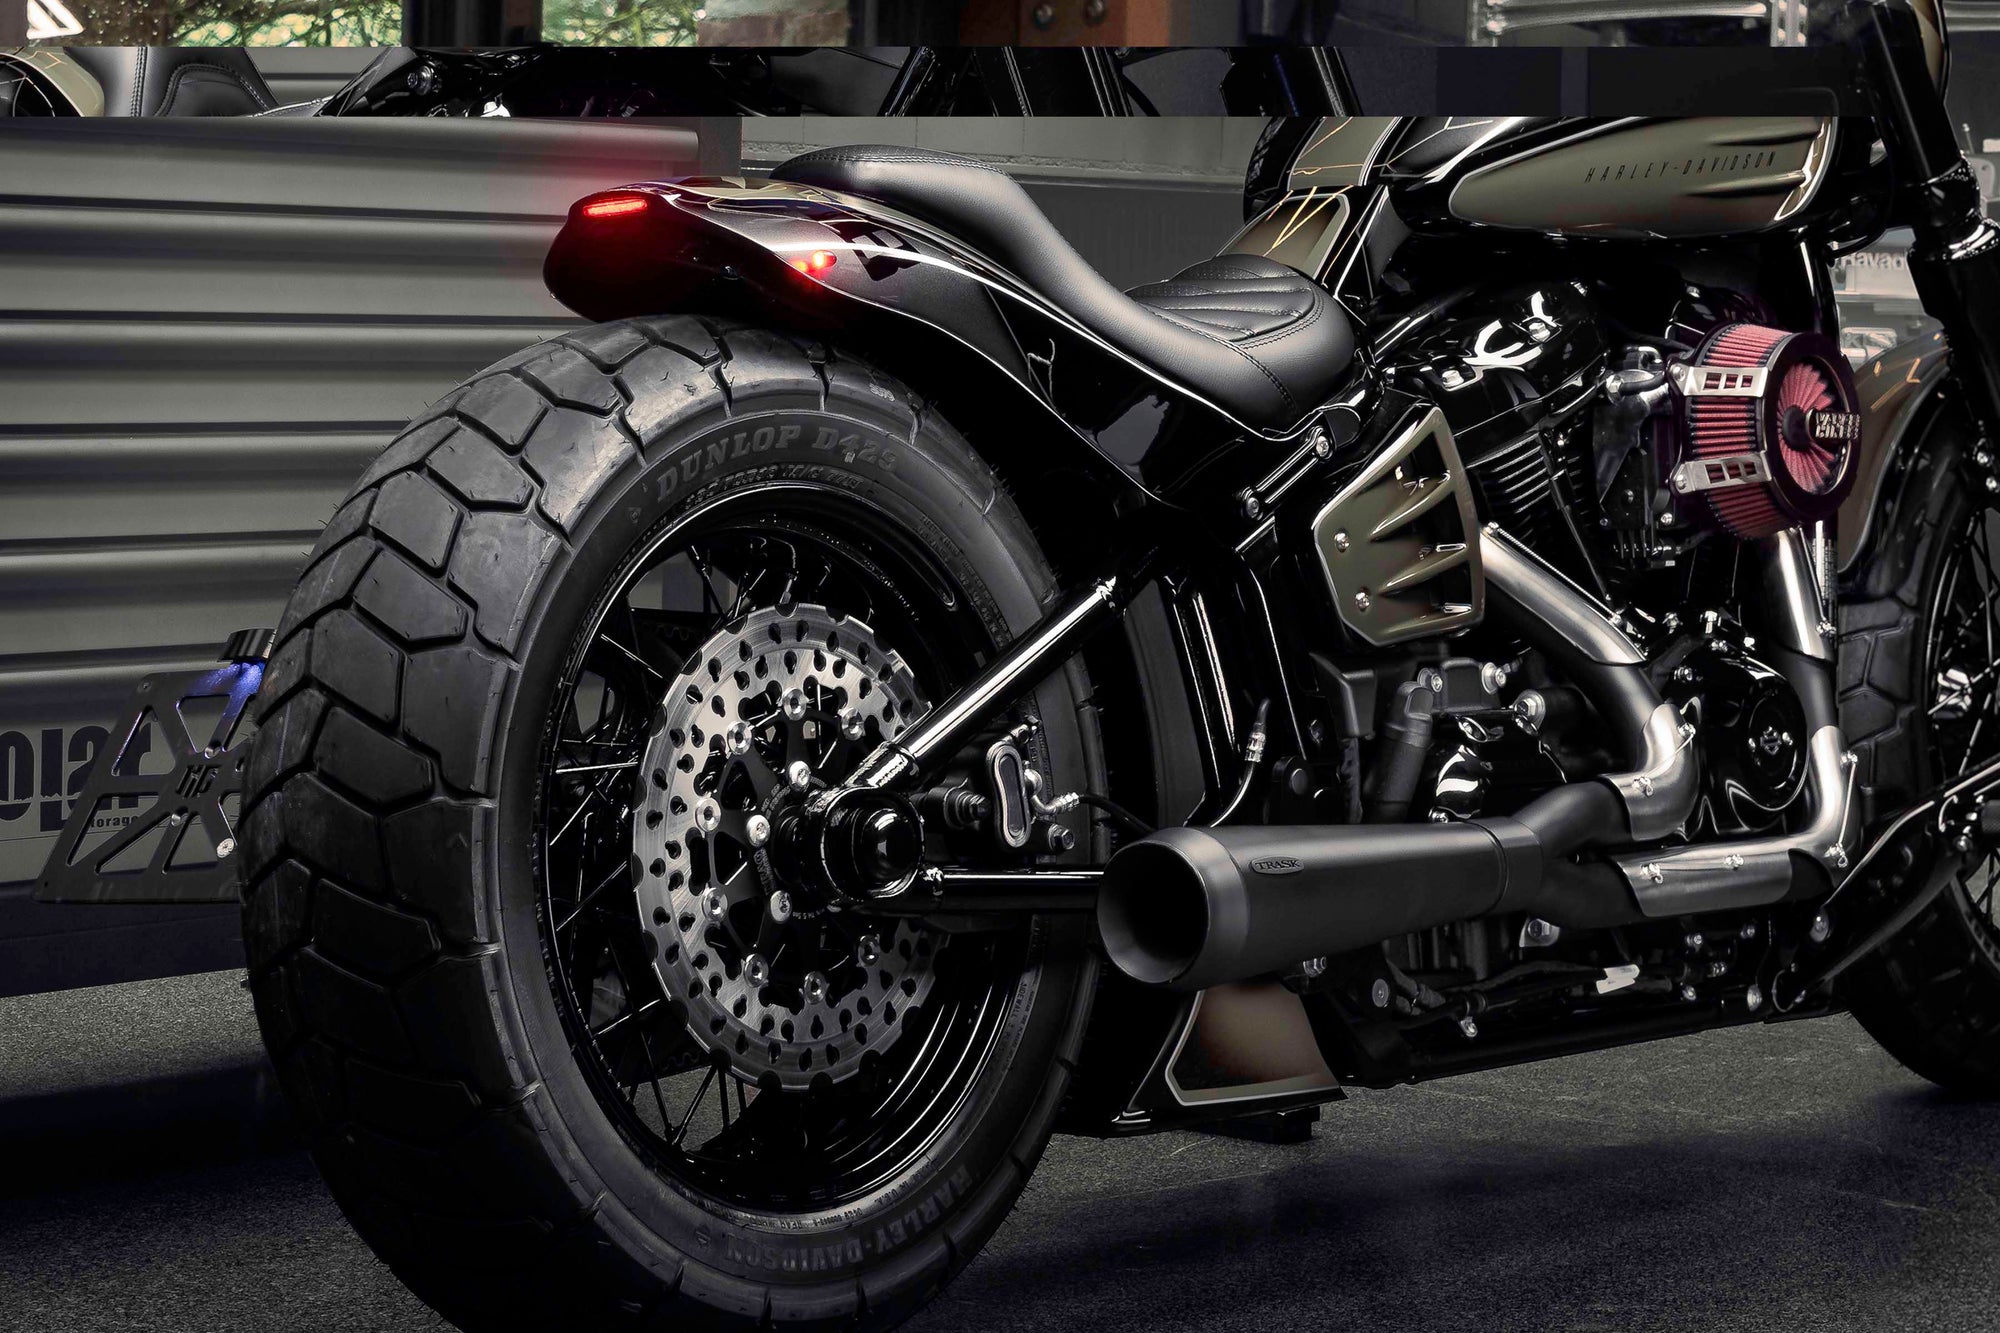 Zoomed Harley Davidson motorcycle with Killer Custom parts from the rear in a modern bike shop